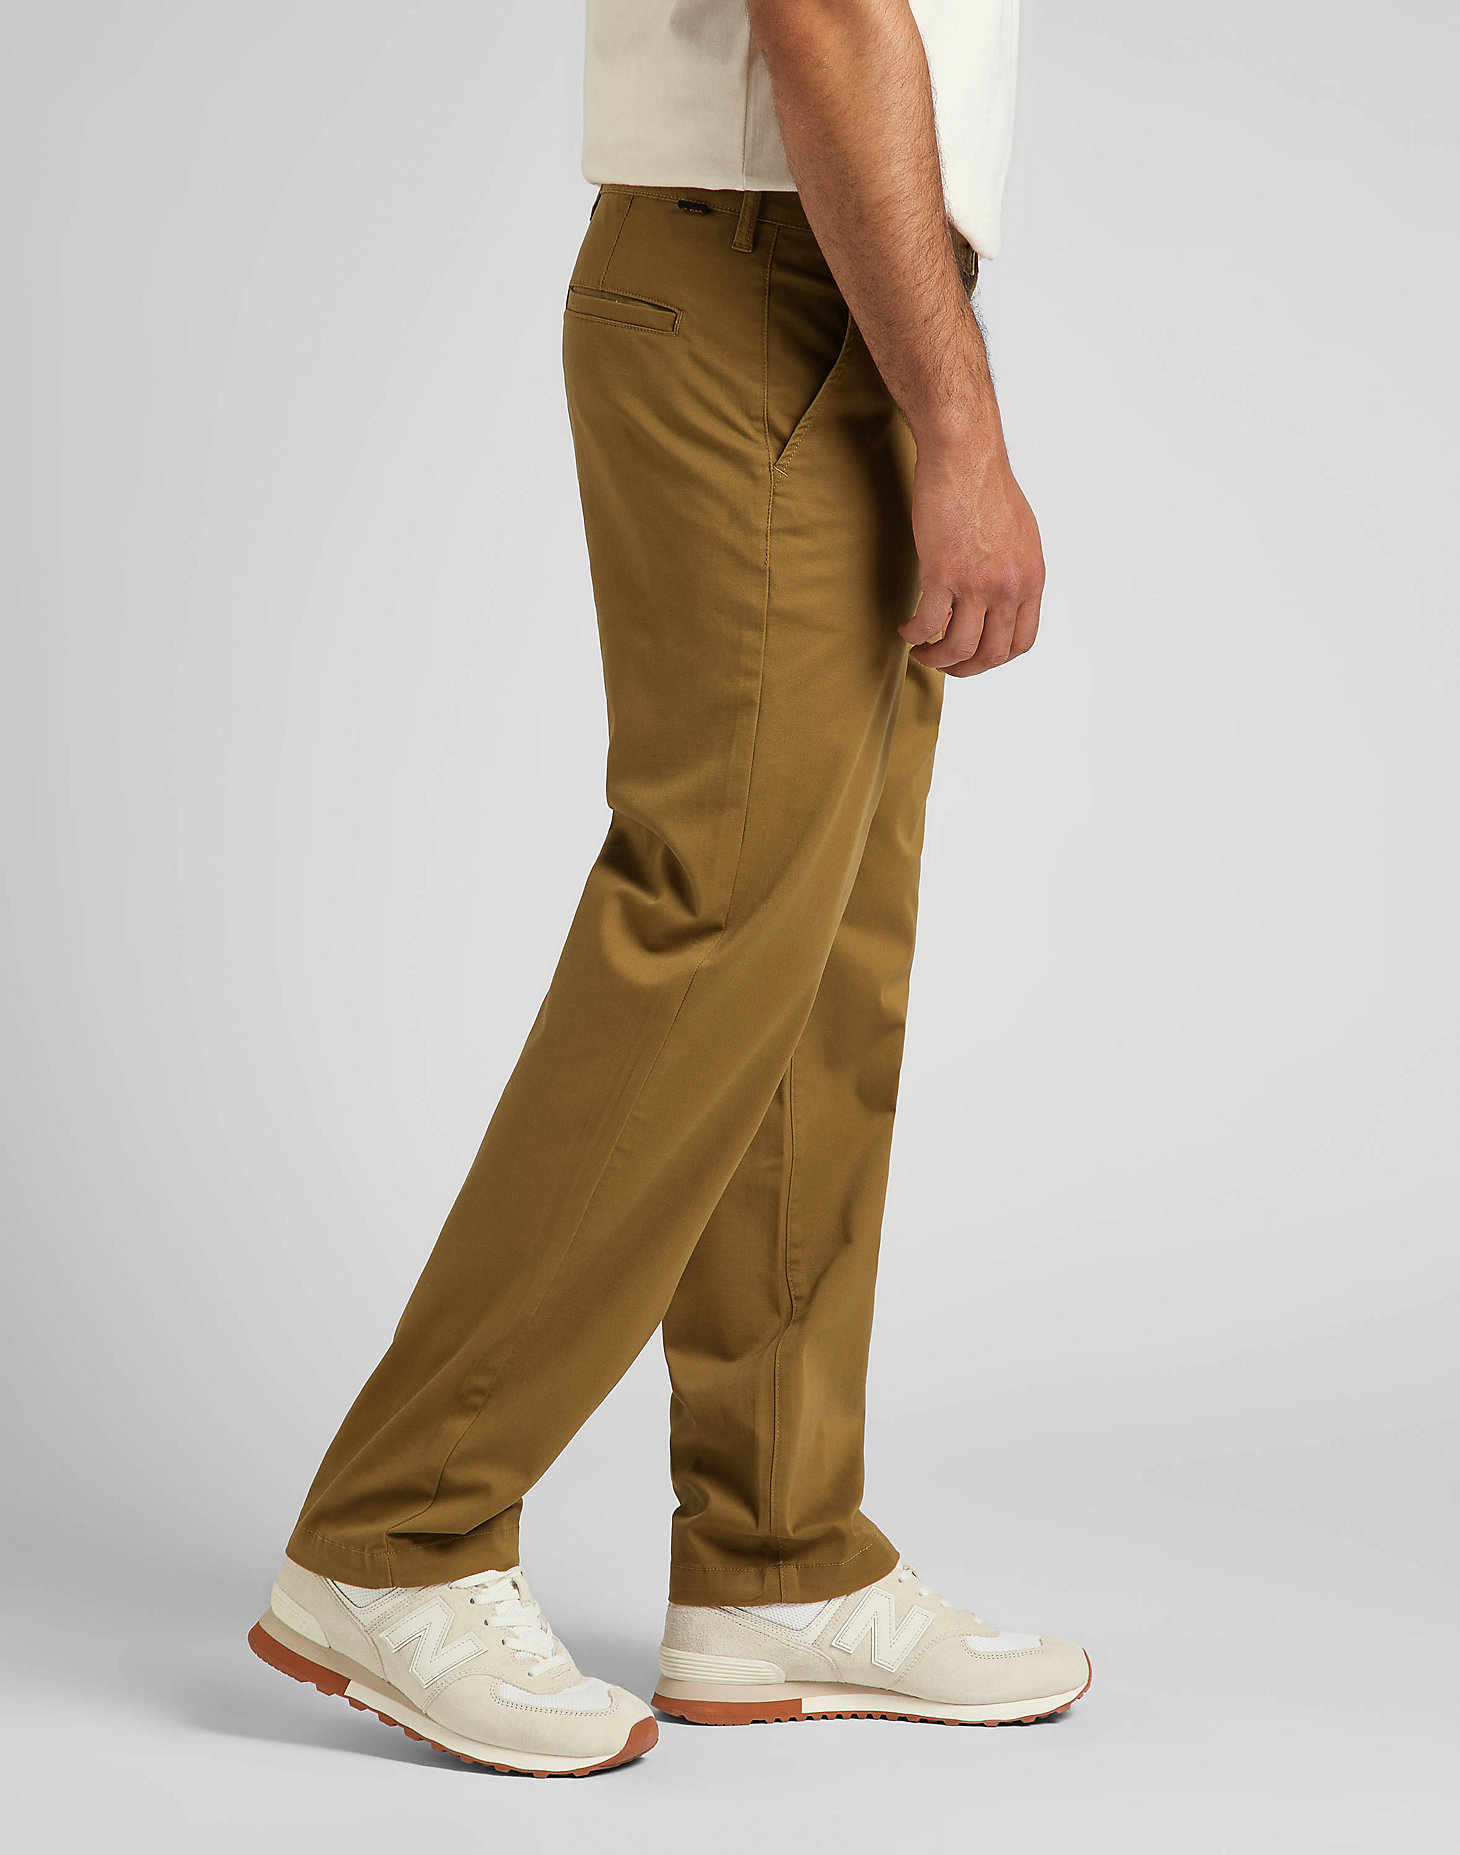 Relaxed Chino in Tumbleweed alternative view 3